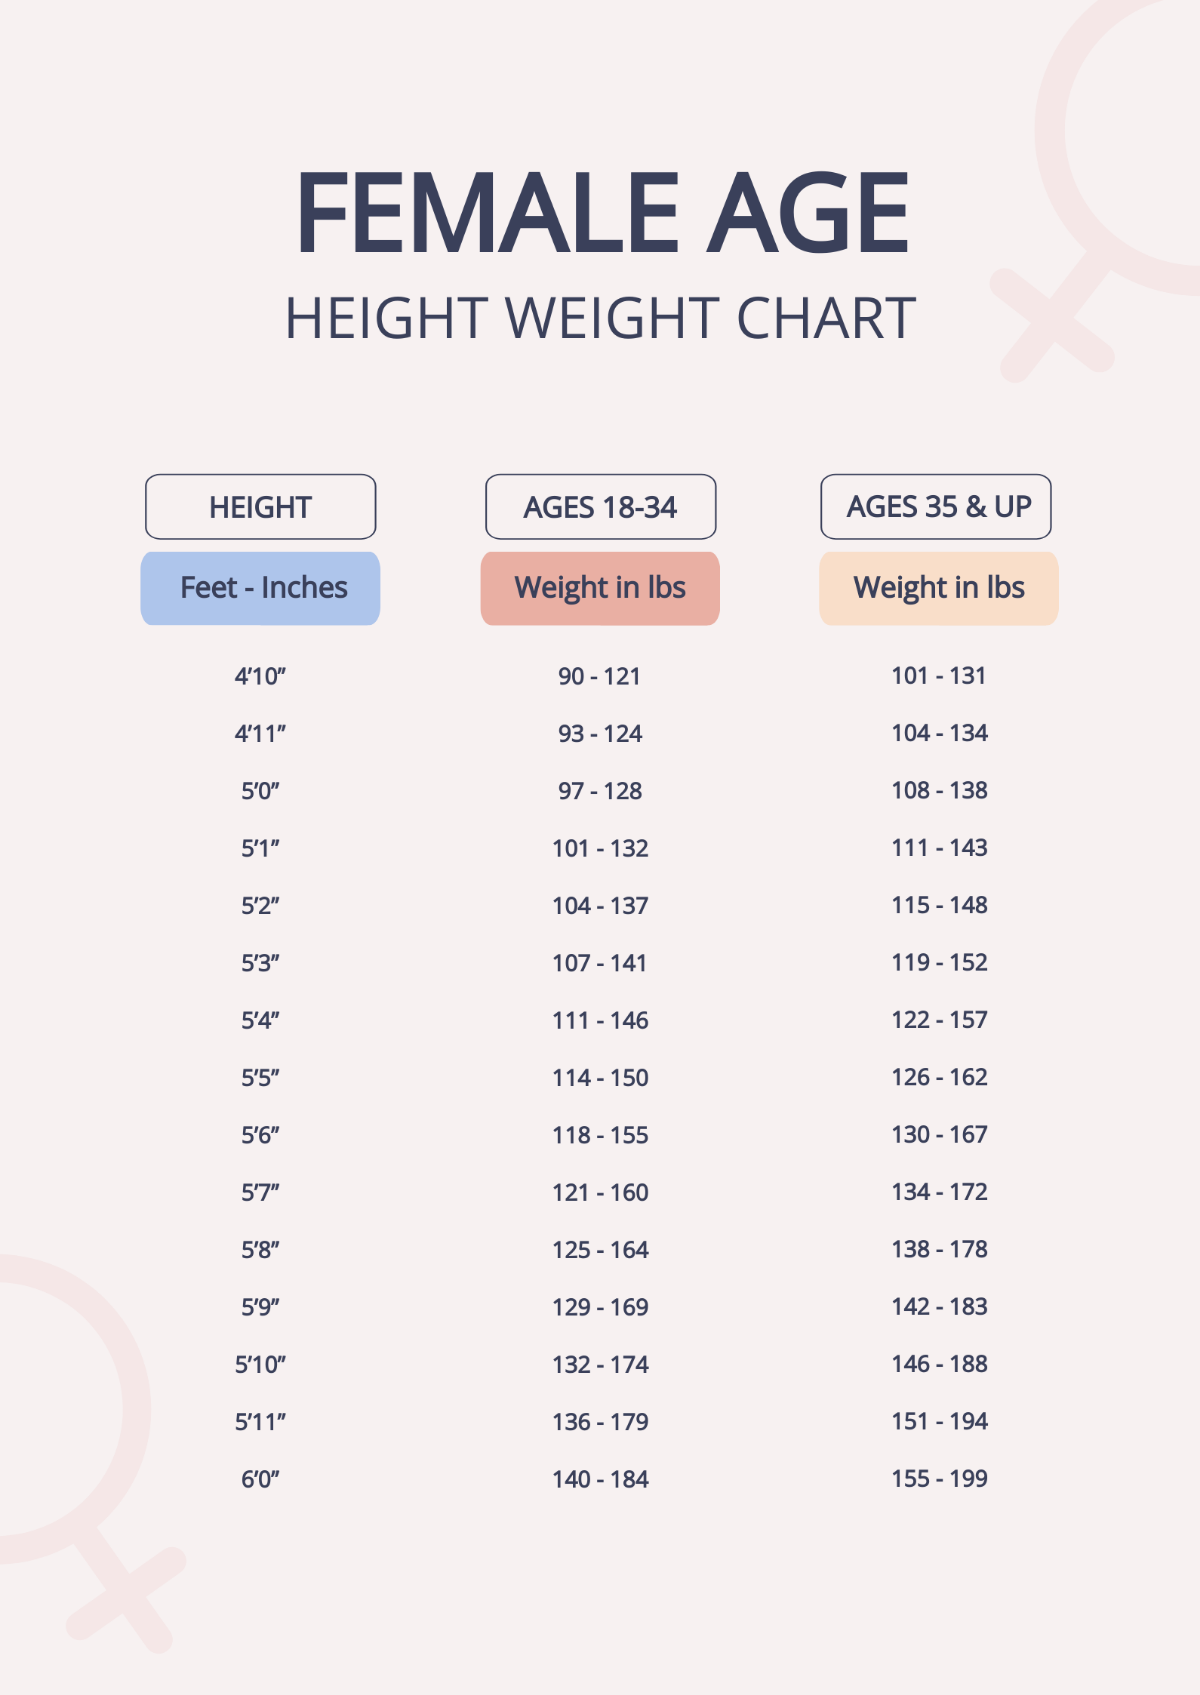 Female Age Height Weight Chart Template